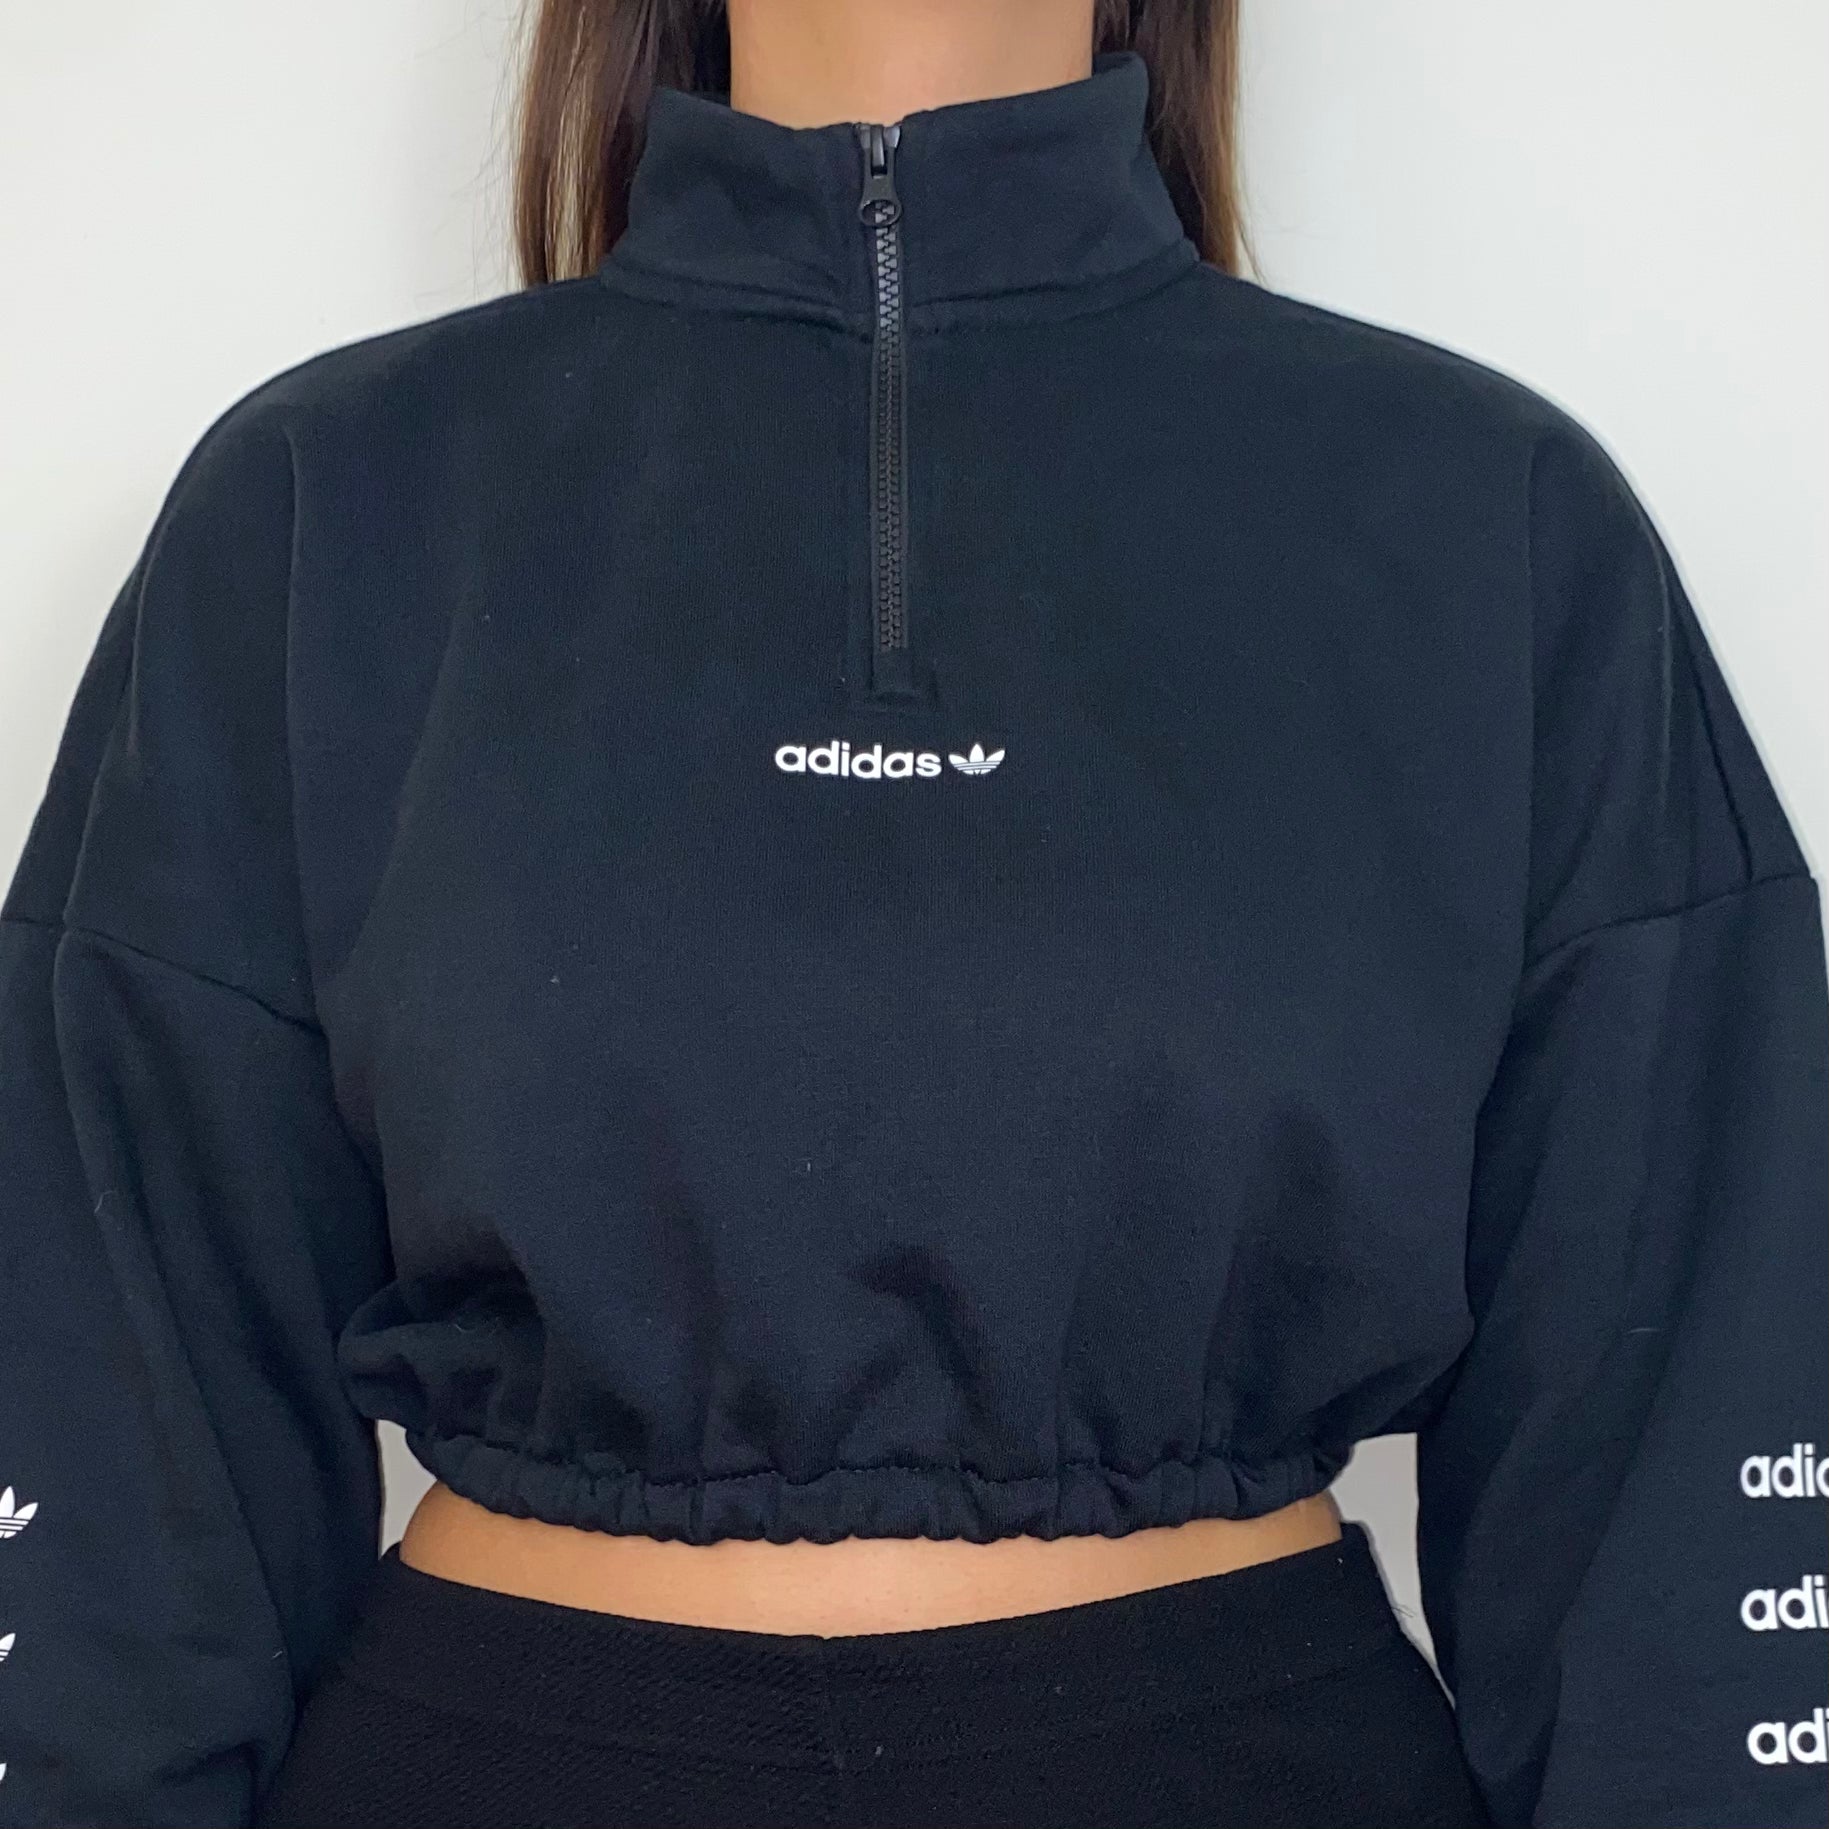 close up of black 1/4 zip cropped sweatshirt with white adidas logo on front and sleeves shown on a model